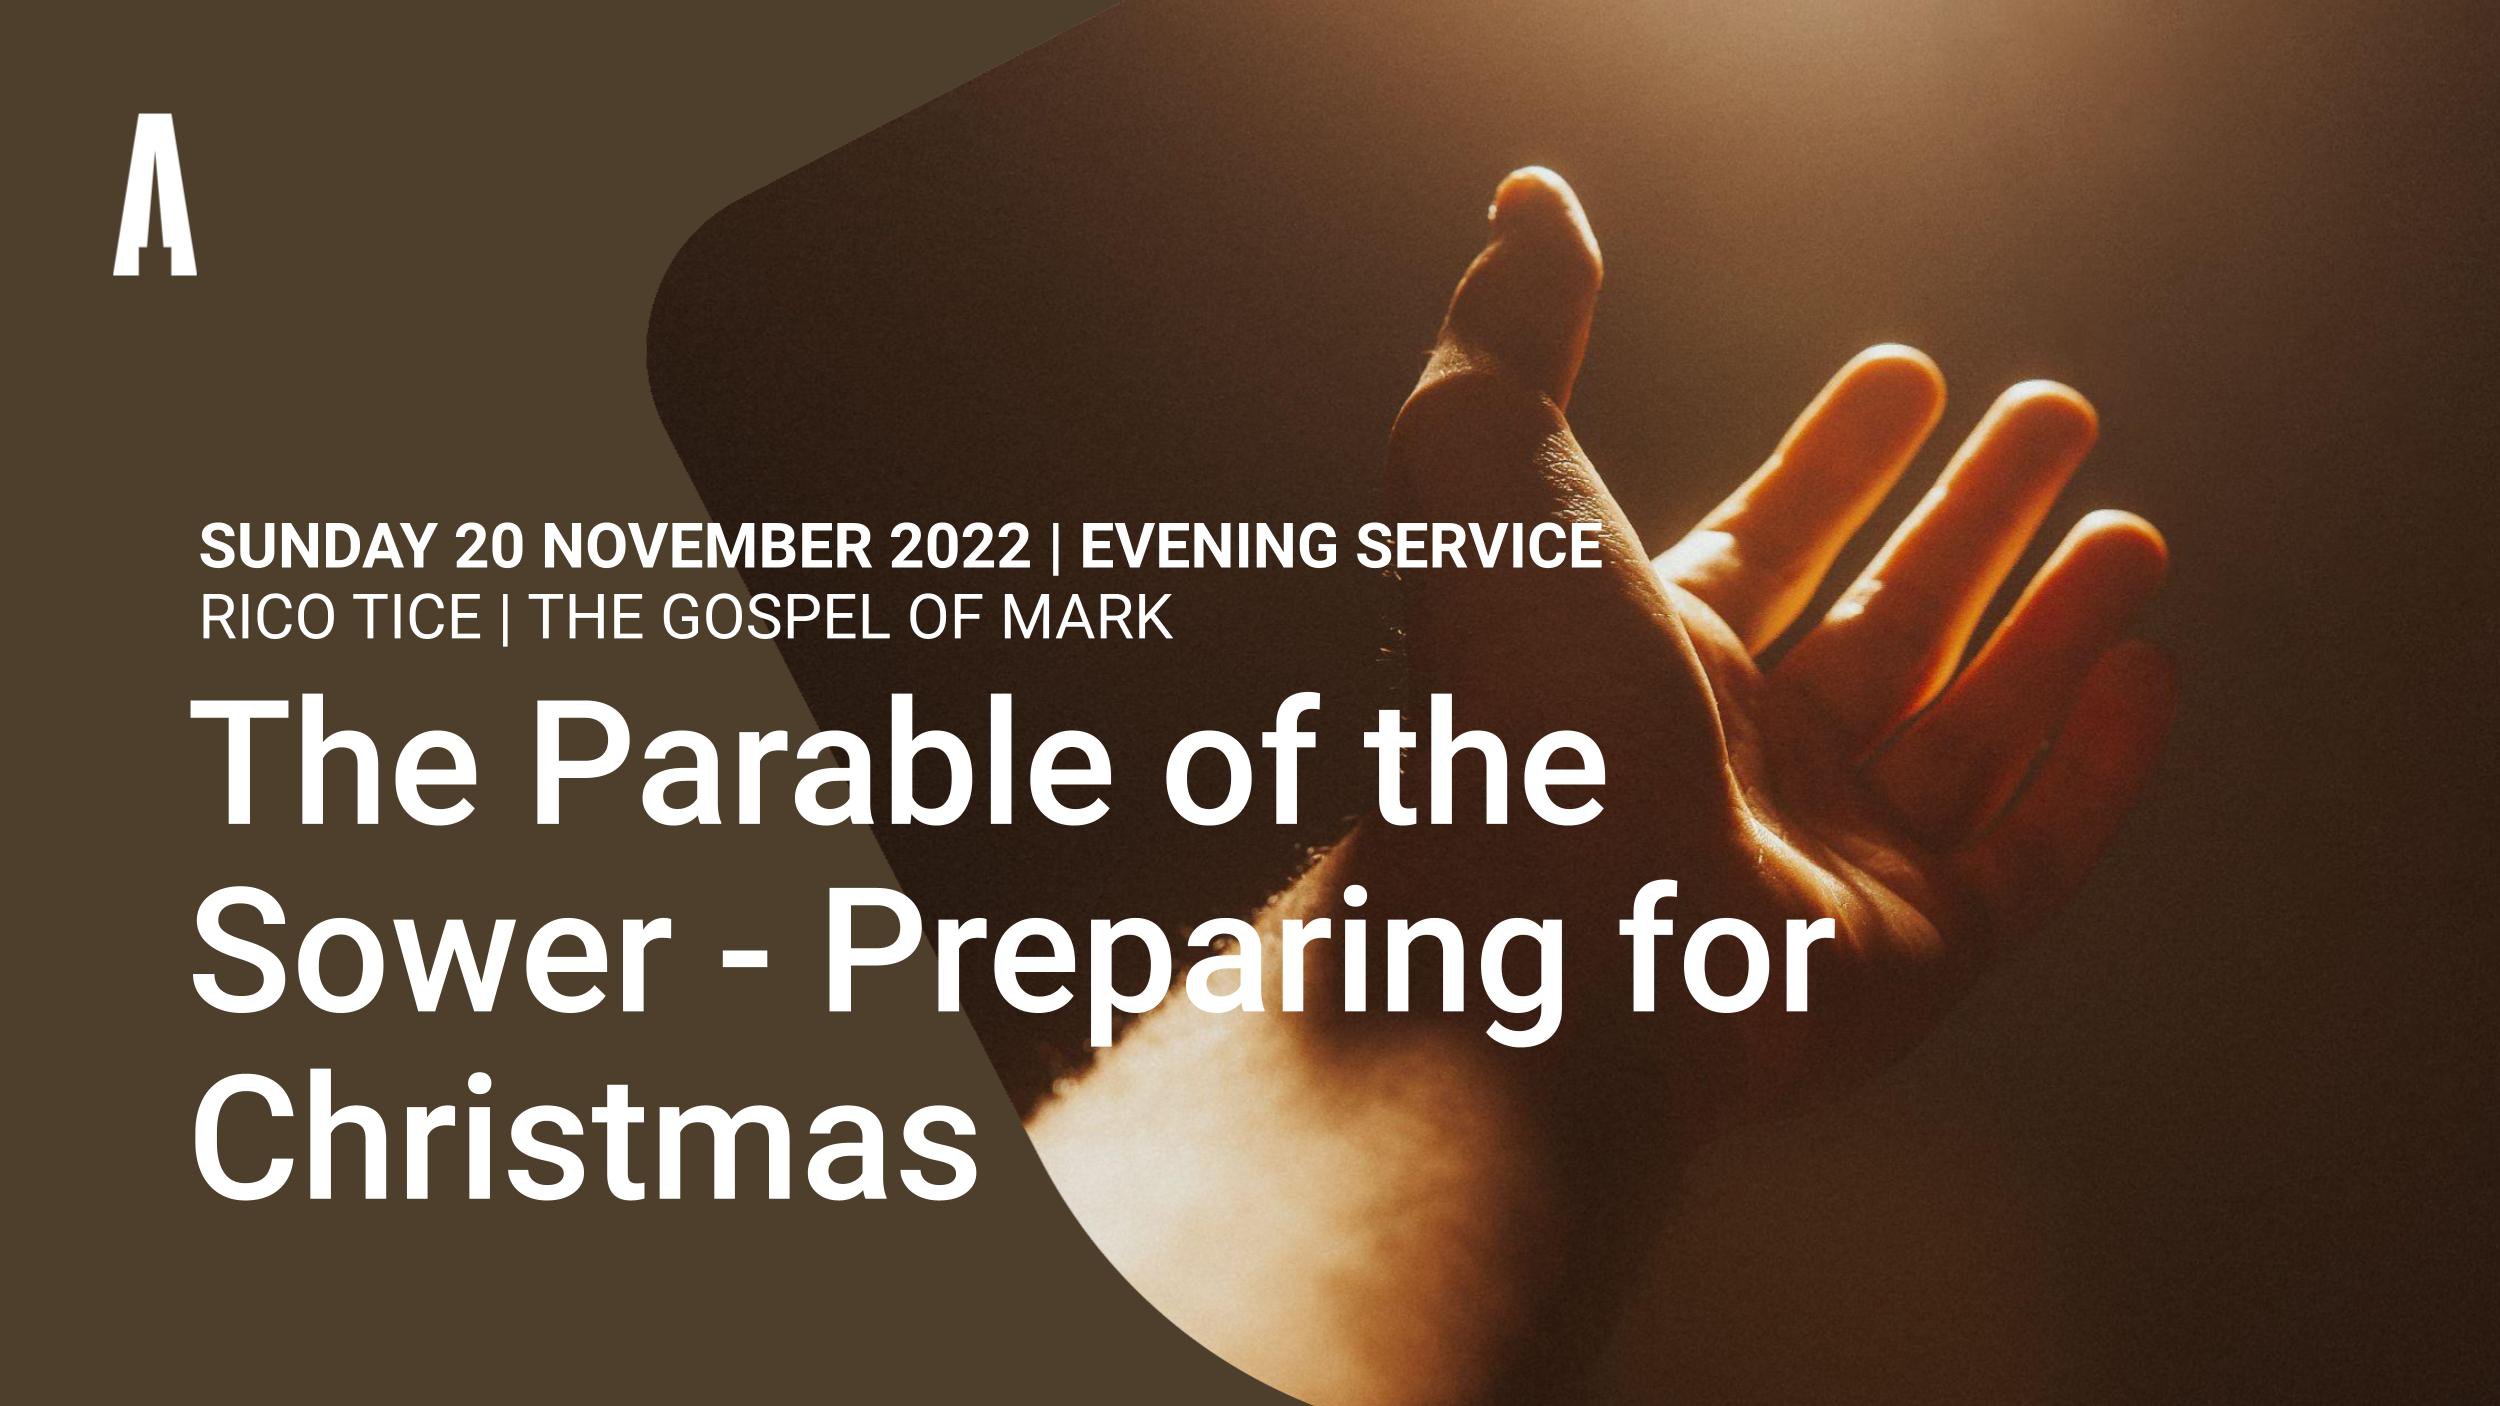 The Parable of the Sower - Preparing for Christmas